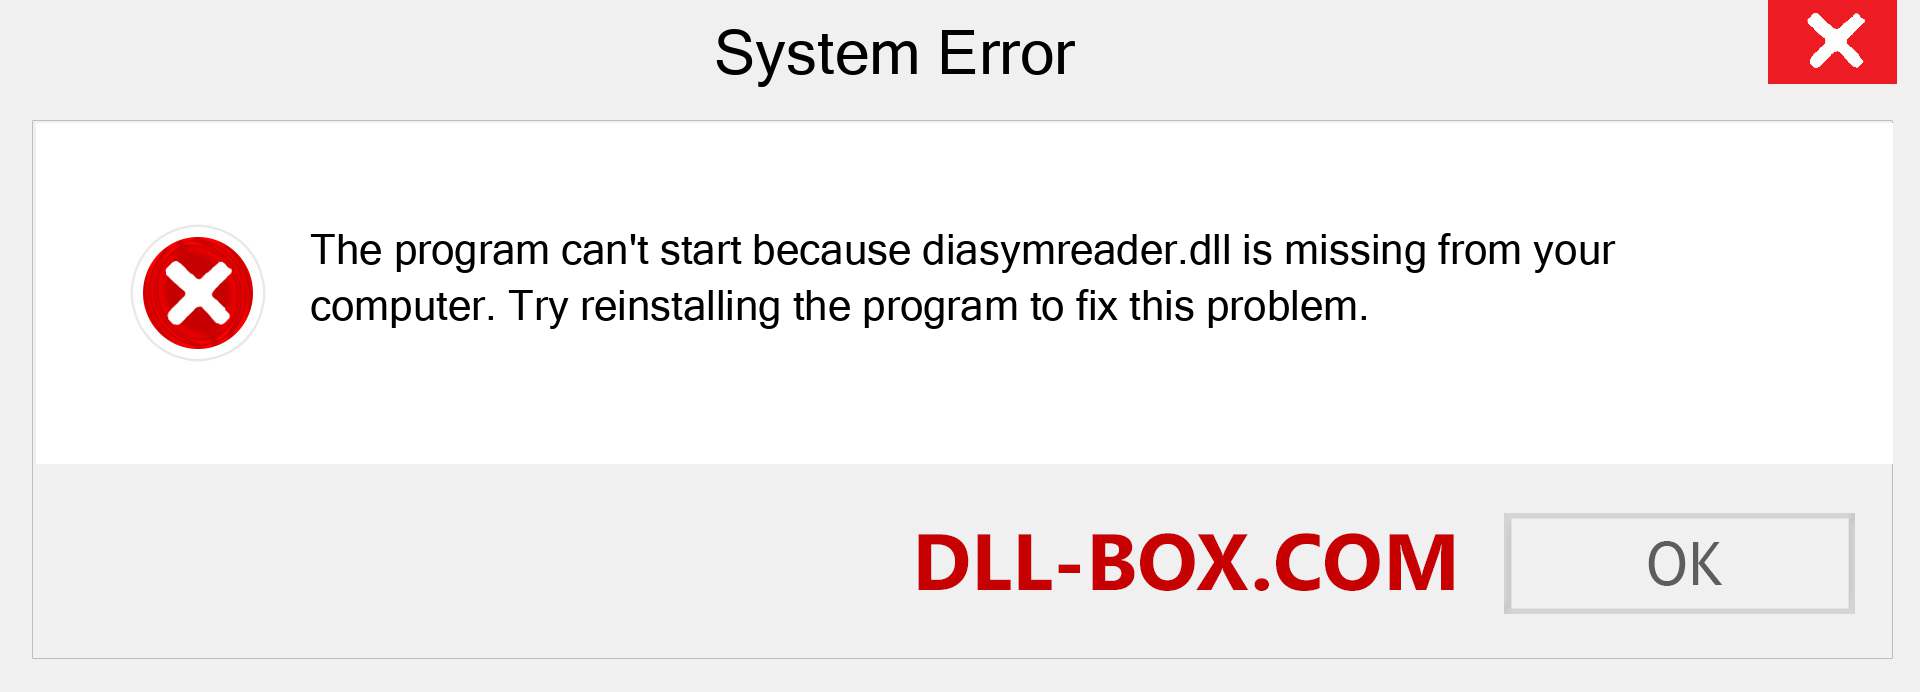  diasymreader.dll file is missing?. Download for Windows 7, 8, 10 - Fix  diasymreader dll Missing Error on Windows, photos, images